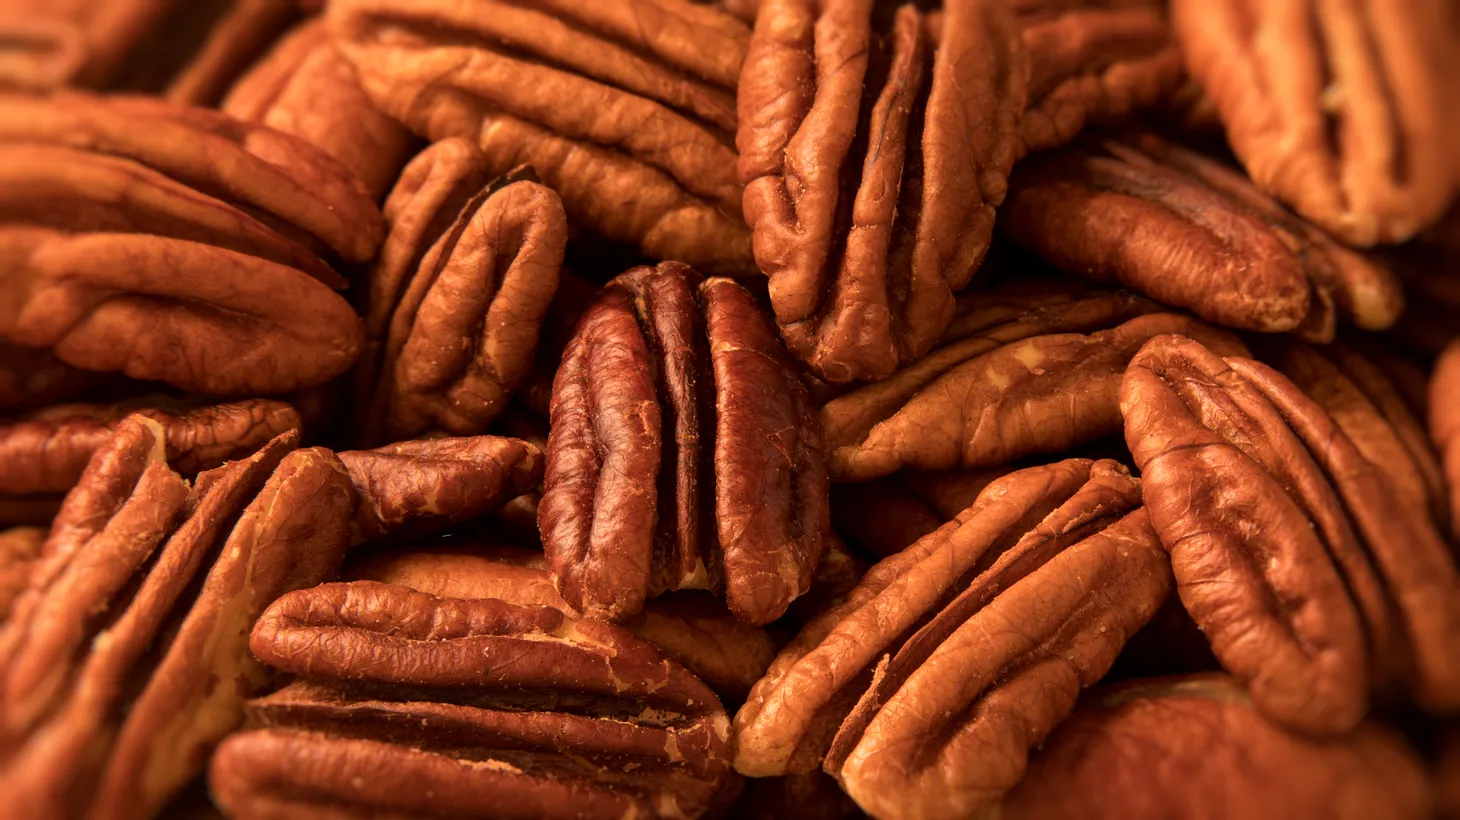 The woodiness of pecans are also familiar in maple syrup and pine nuts.